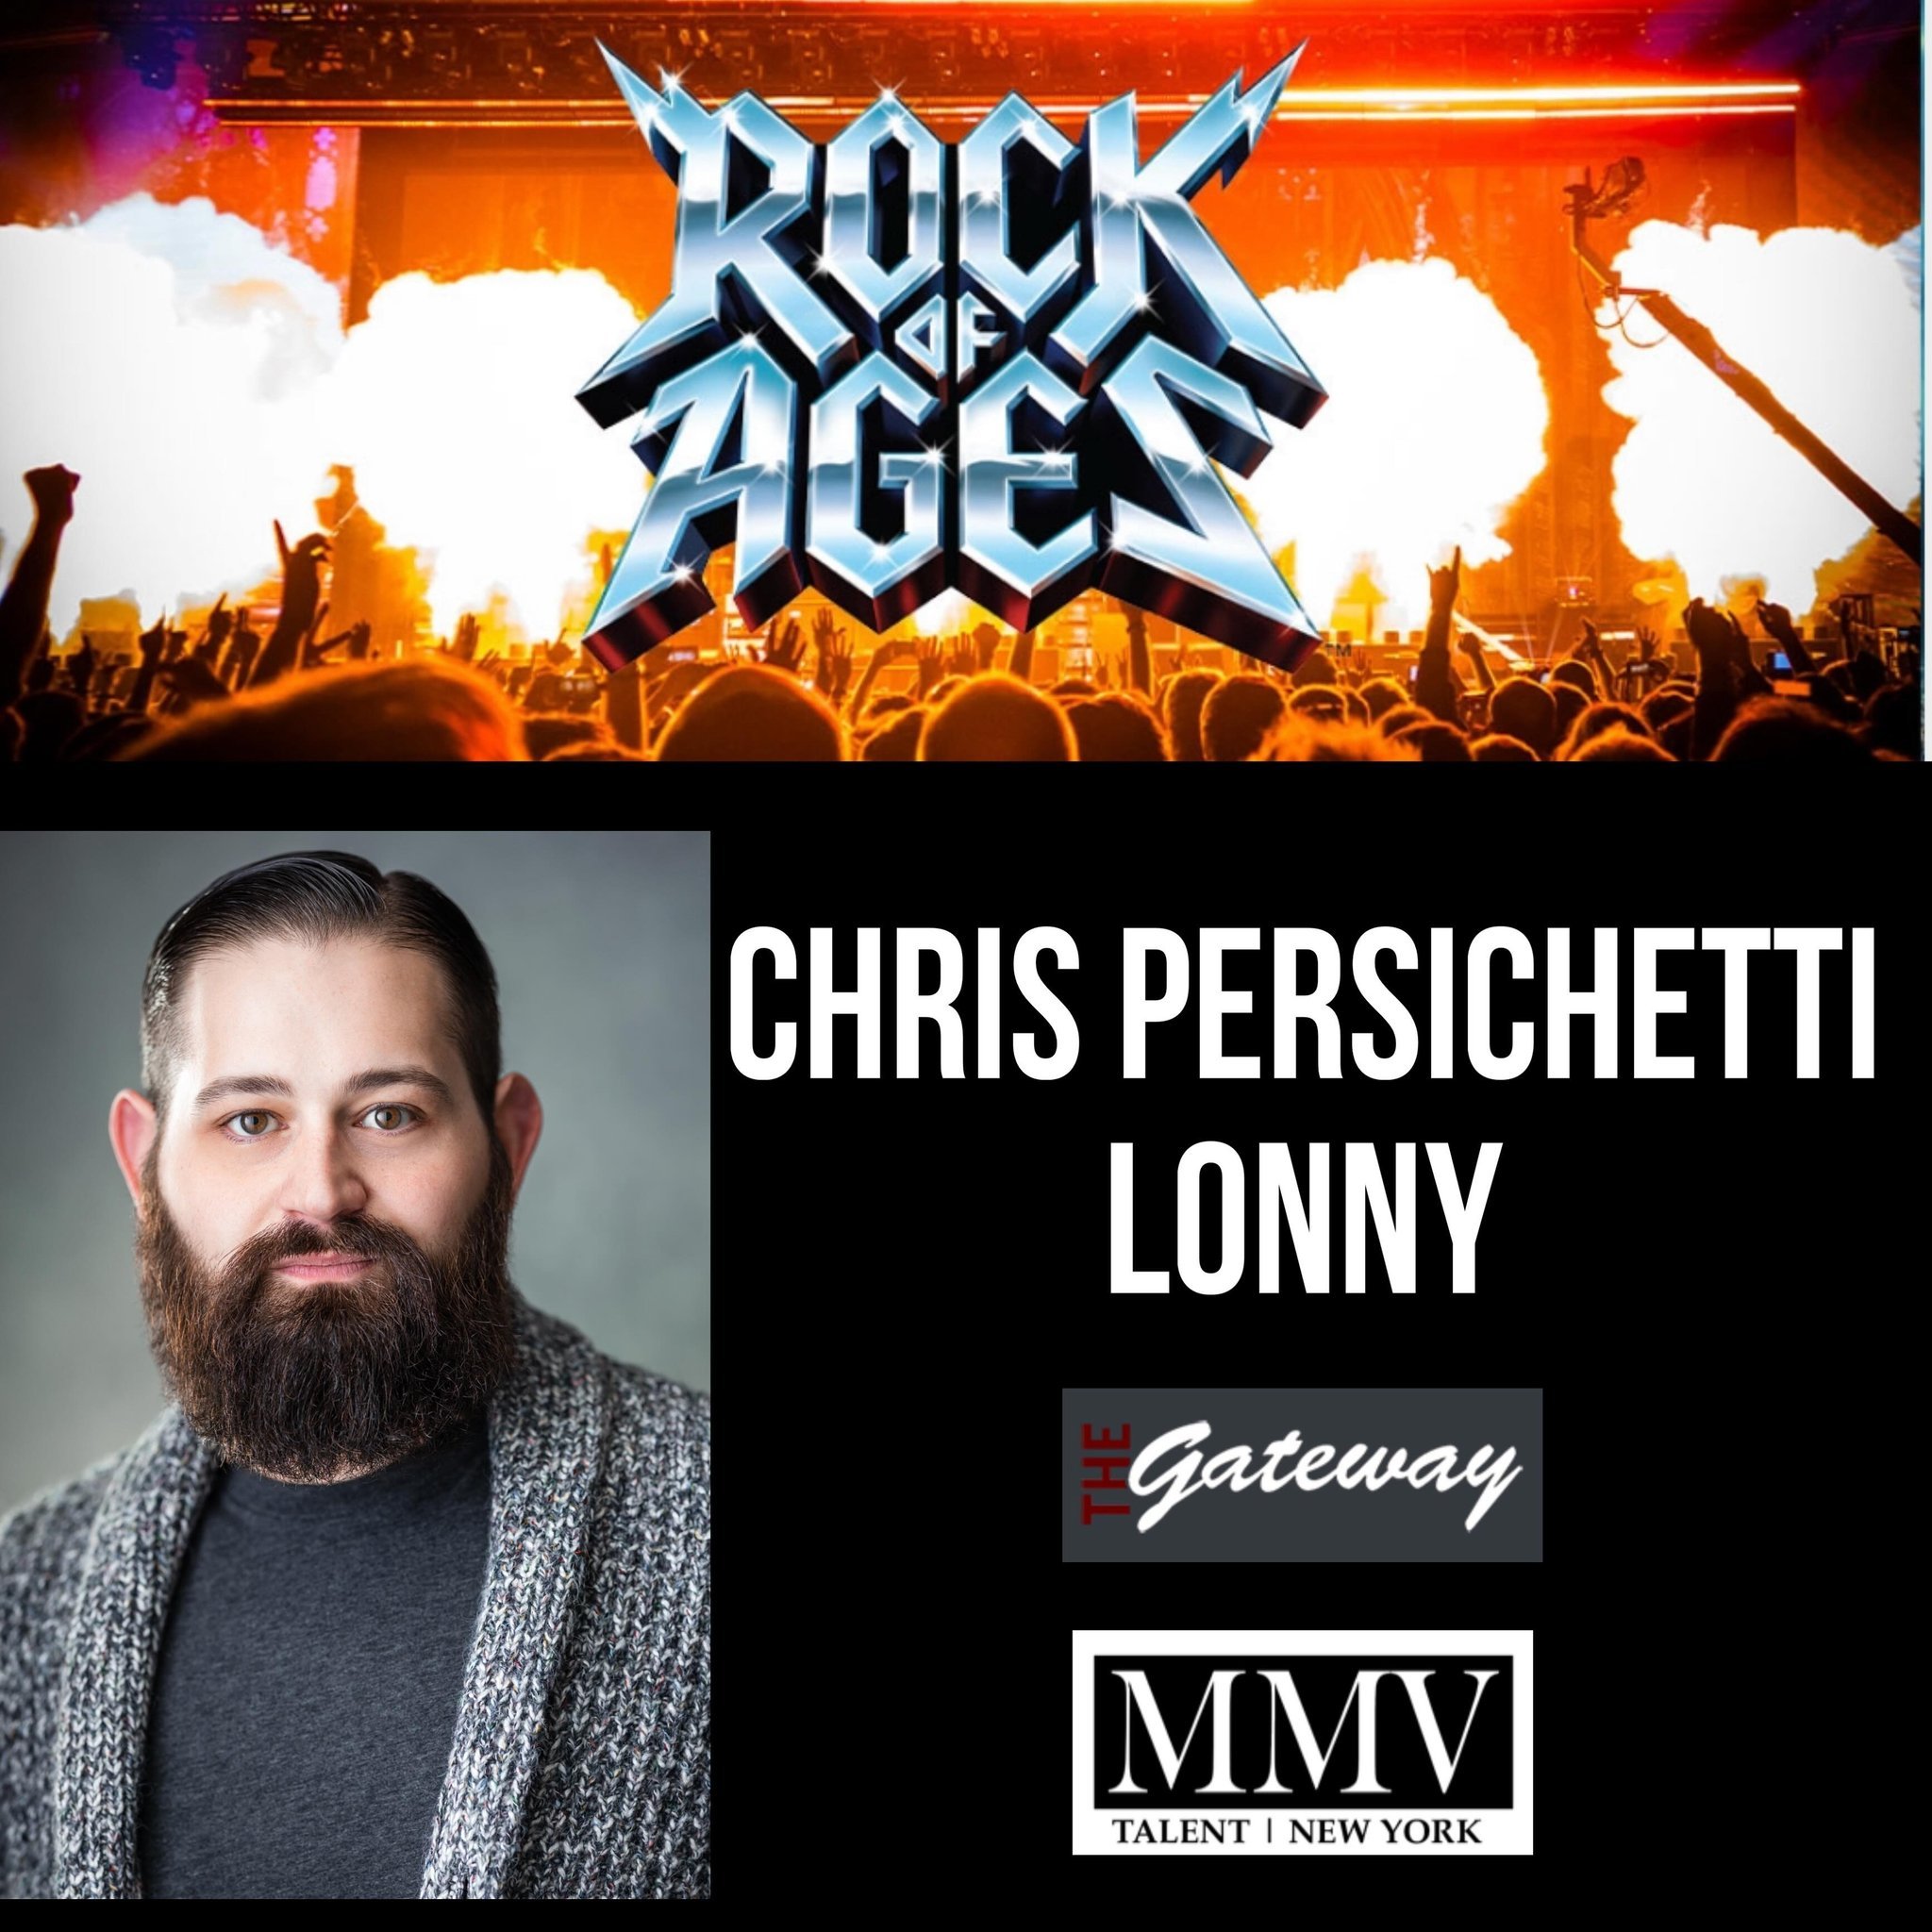 CHRIS PERSICHETTI is Lonny in Rock of Ages.🤘
Rocking the stage at The Gateway!
@chrisrozanski 
#mmvtalent